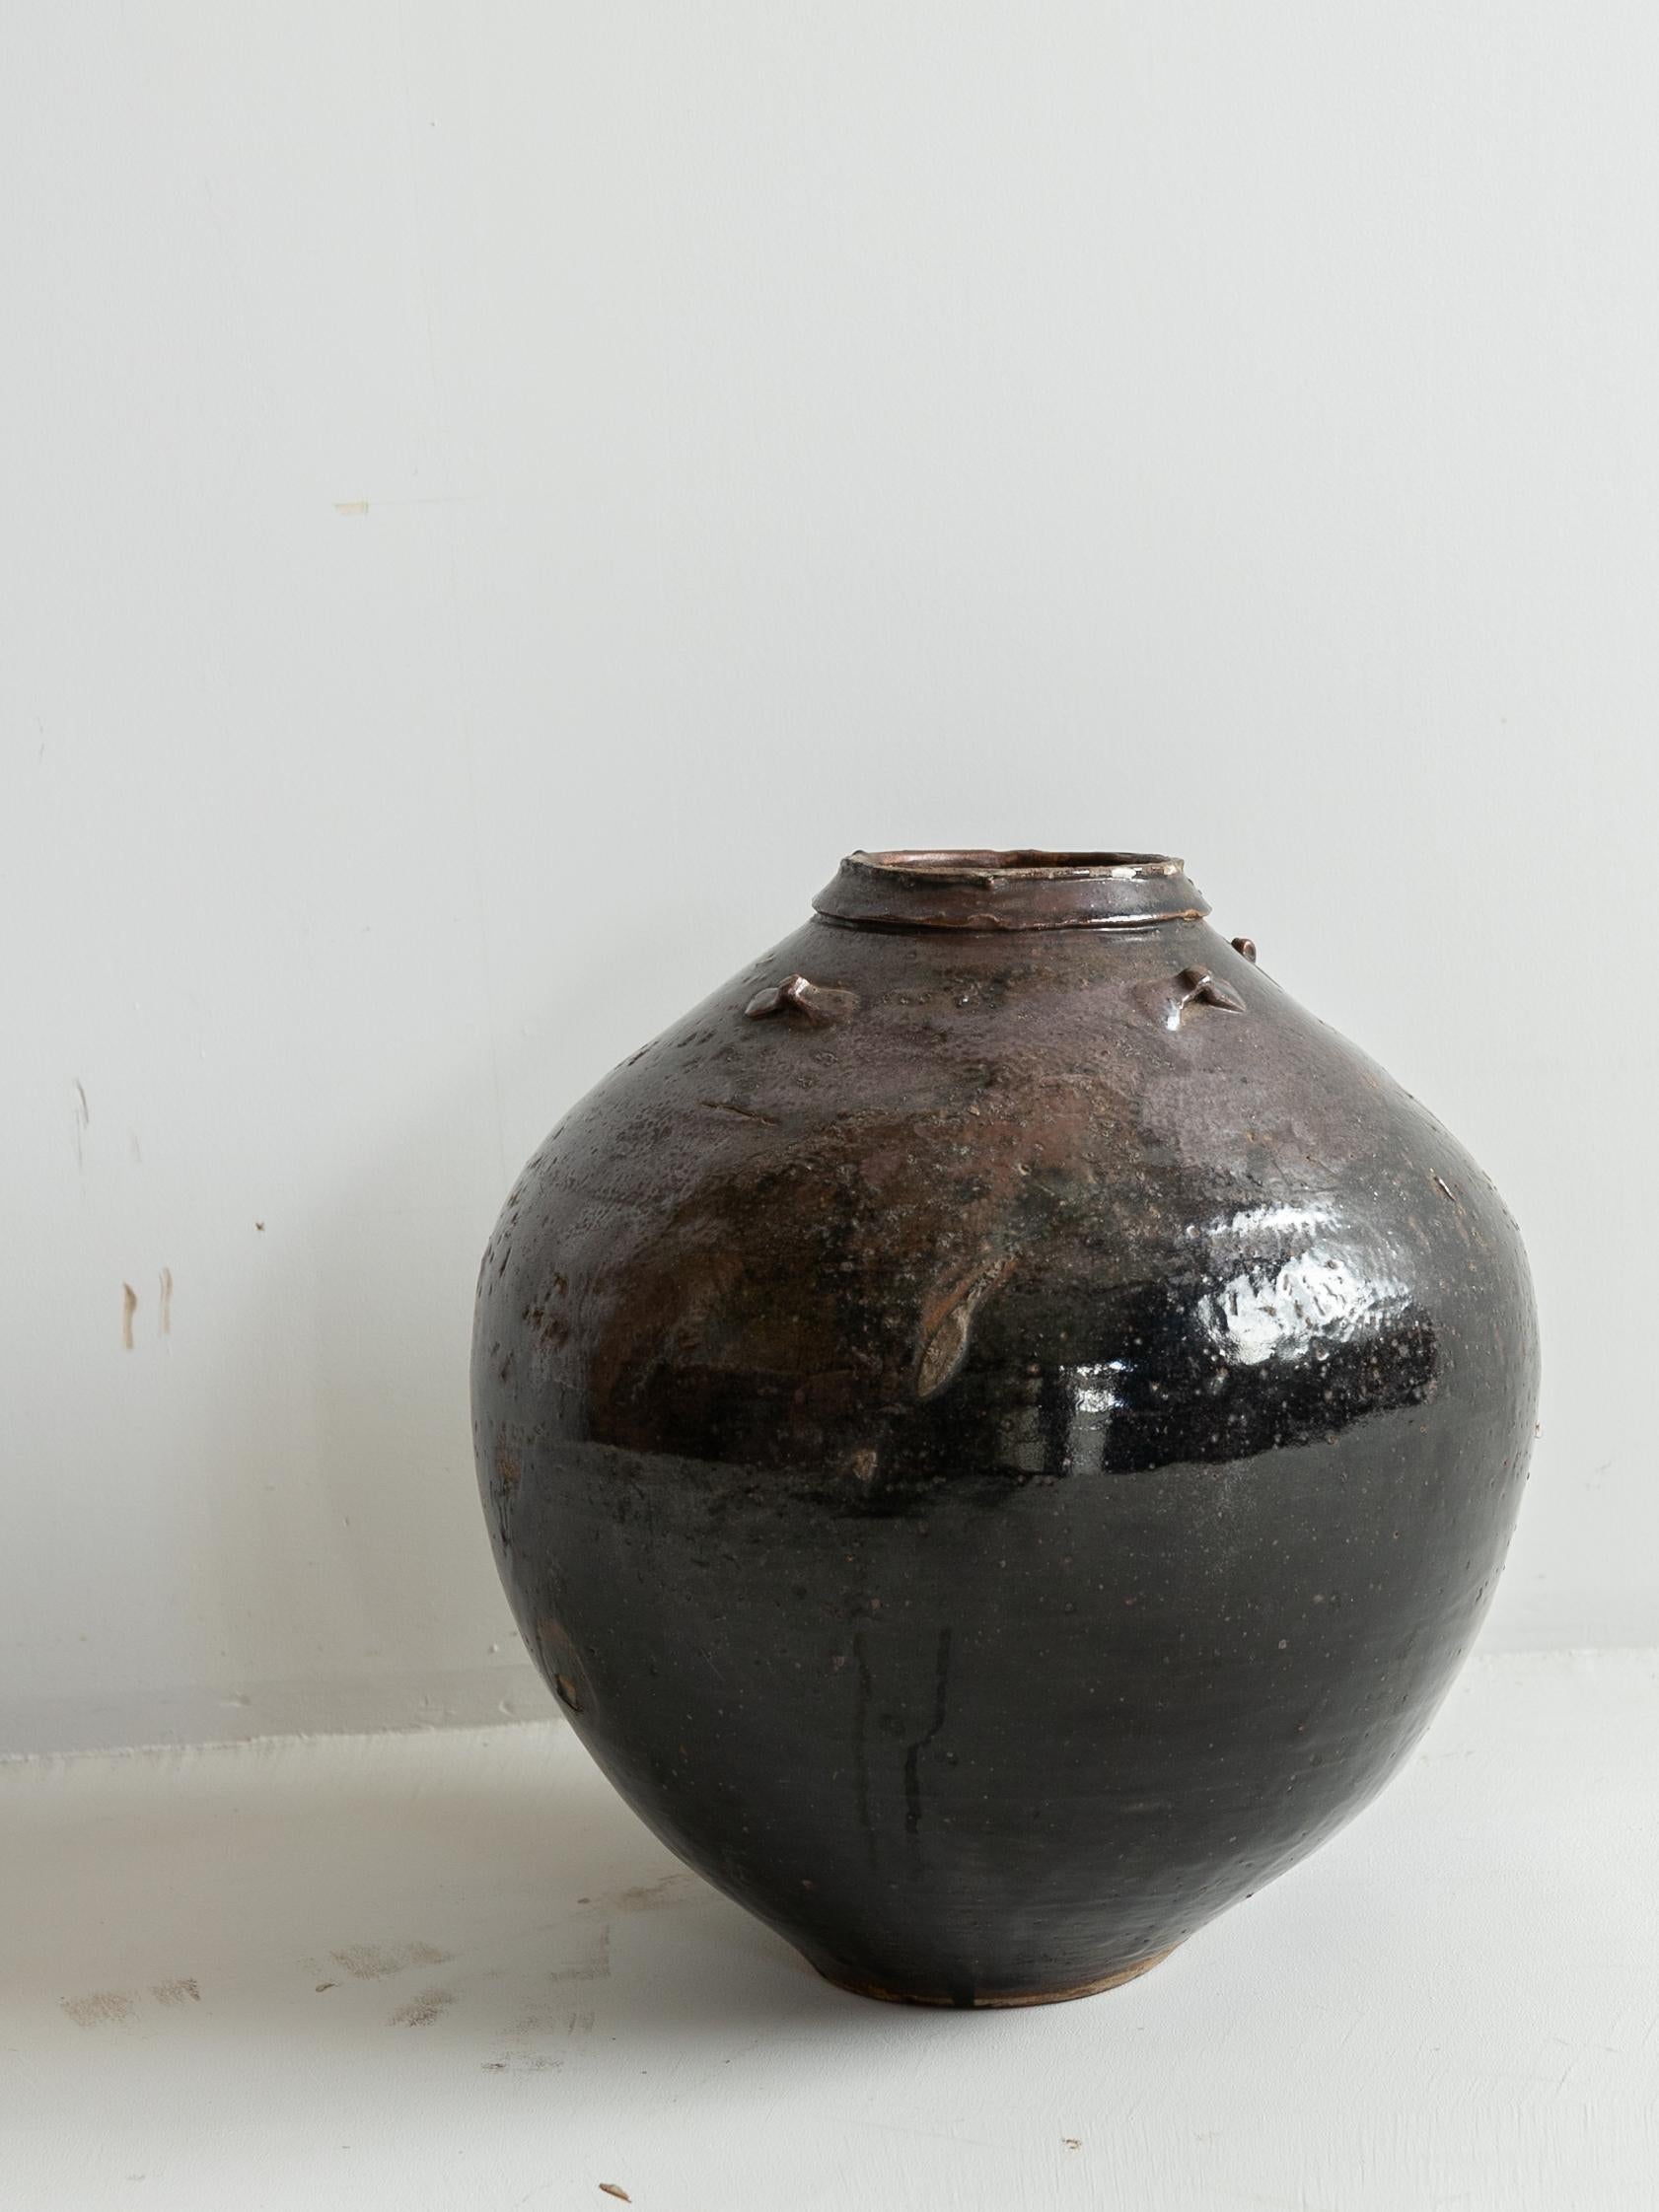 Nice Chinese antique pottery has arrived.
This has long been known as the 